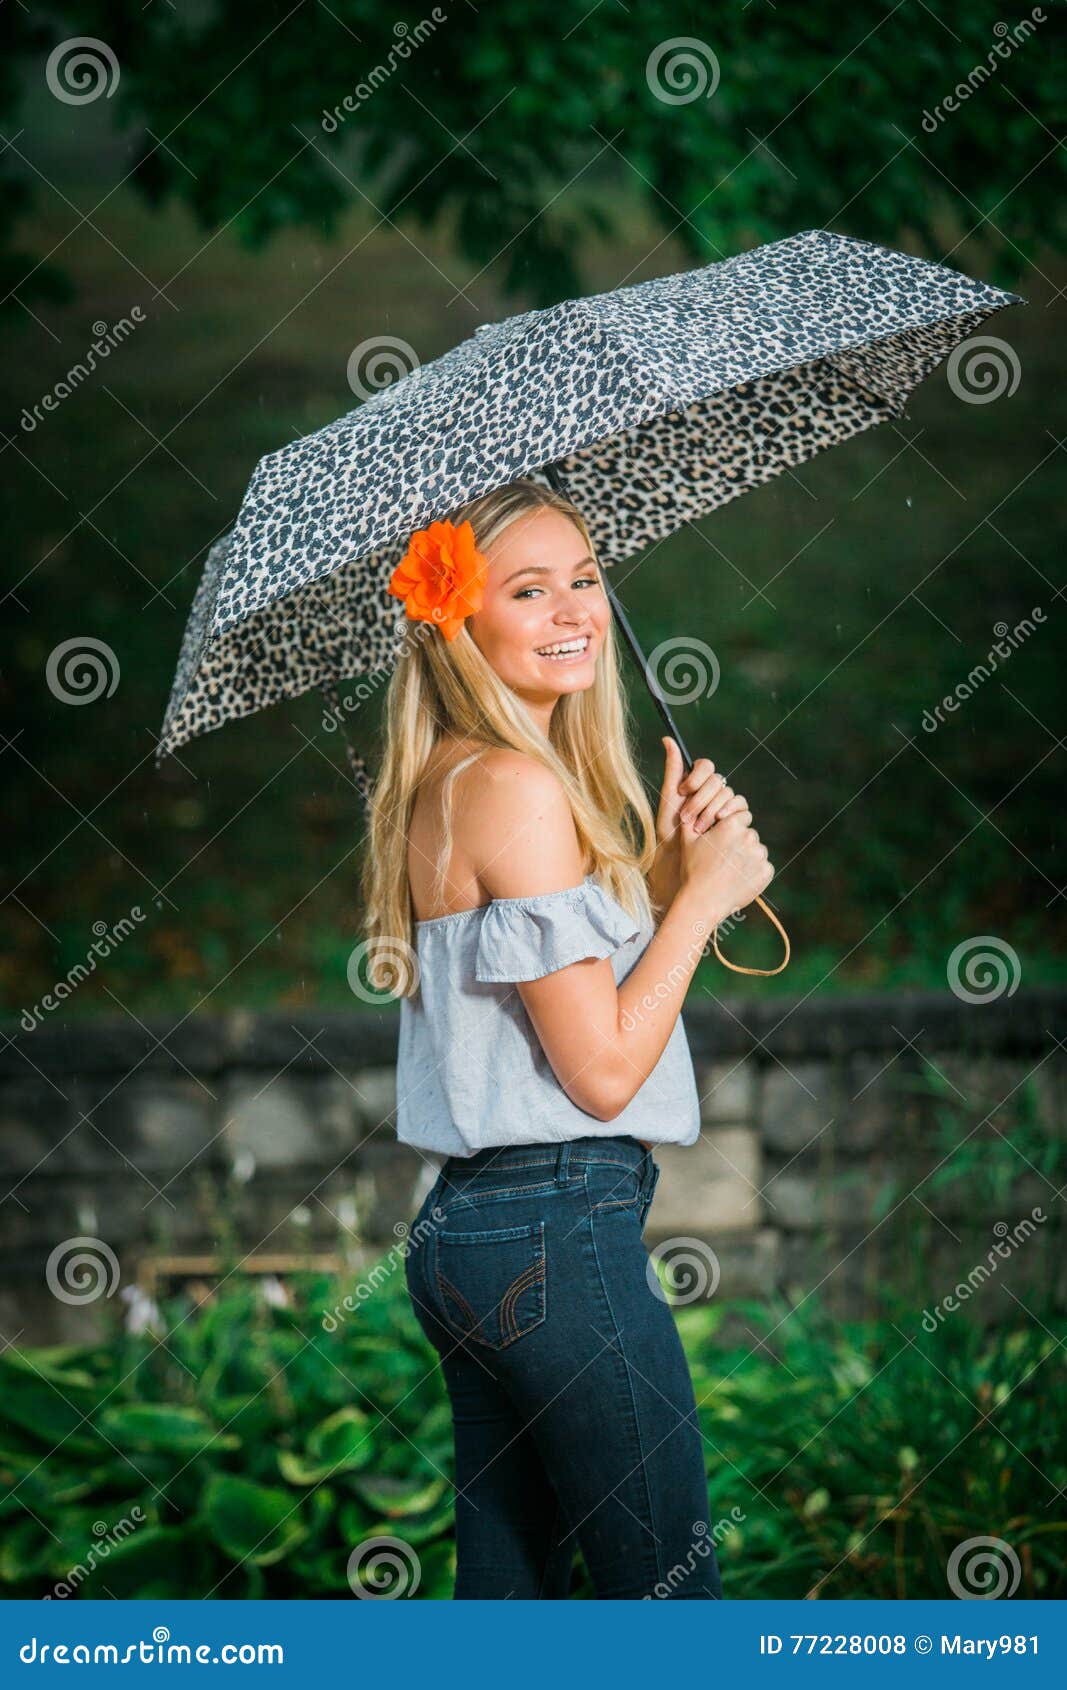 Pensive Beautiful Girl, in a Yellow Dress, Thinks and Poses with a Rainbow  Umbrella, on a Yellow Background Stock Image - Image of delight, pensive:  193204583